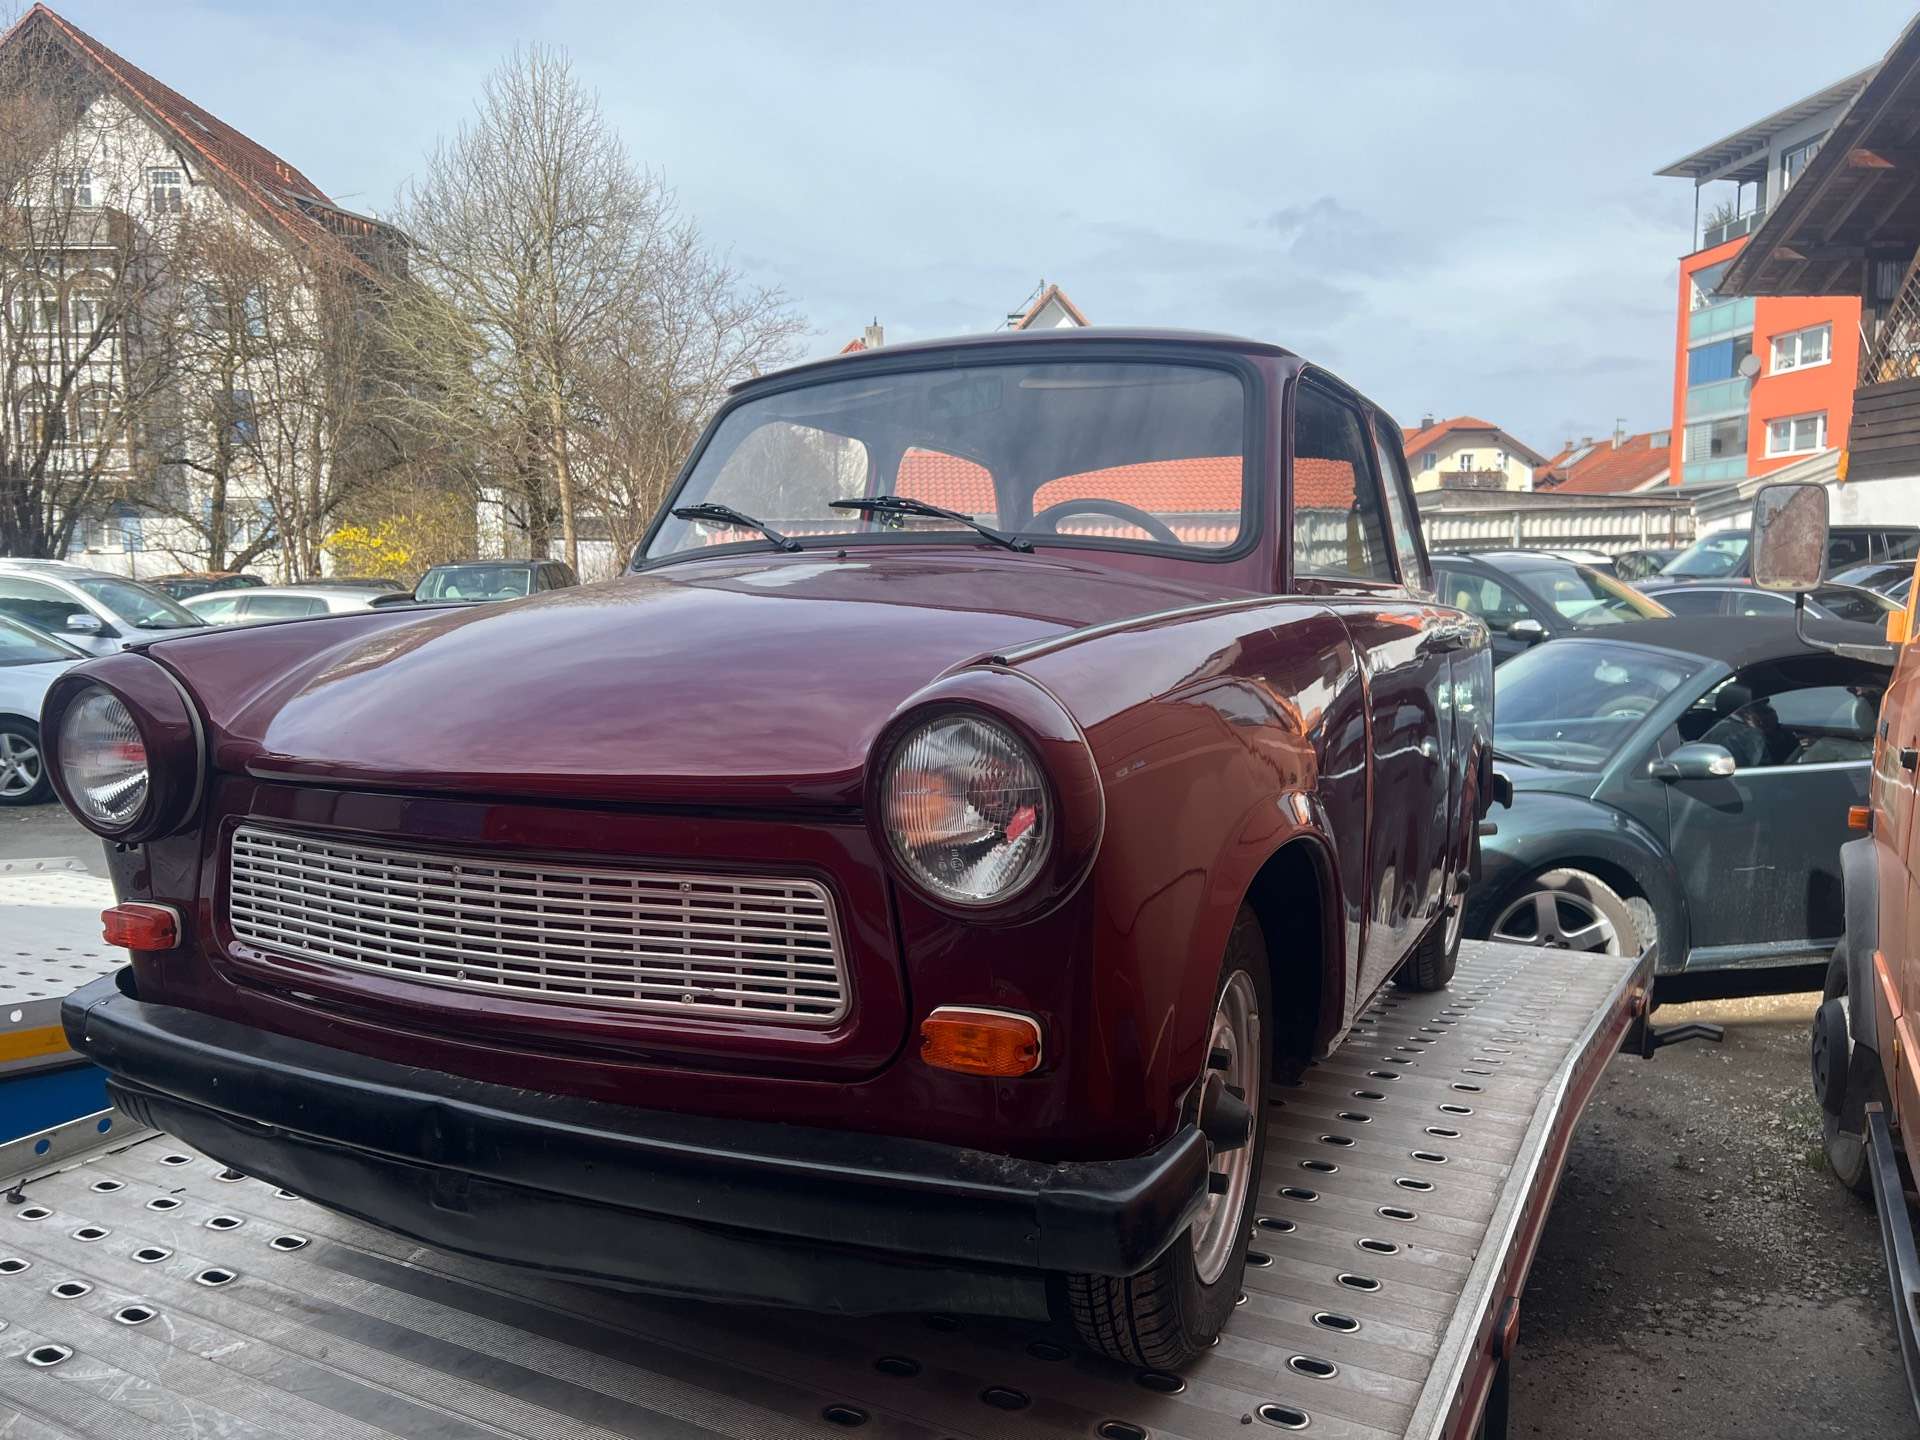 Trabant P601 Other in Red used in Rosenheim for € 4,700.-